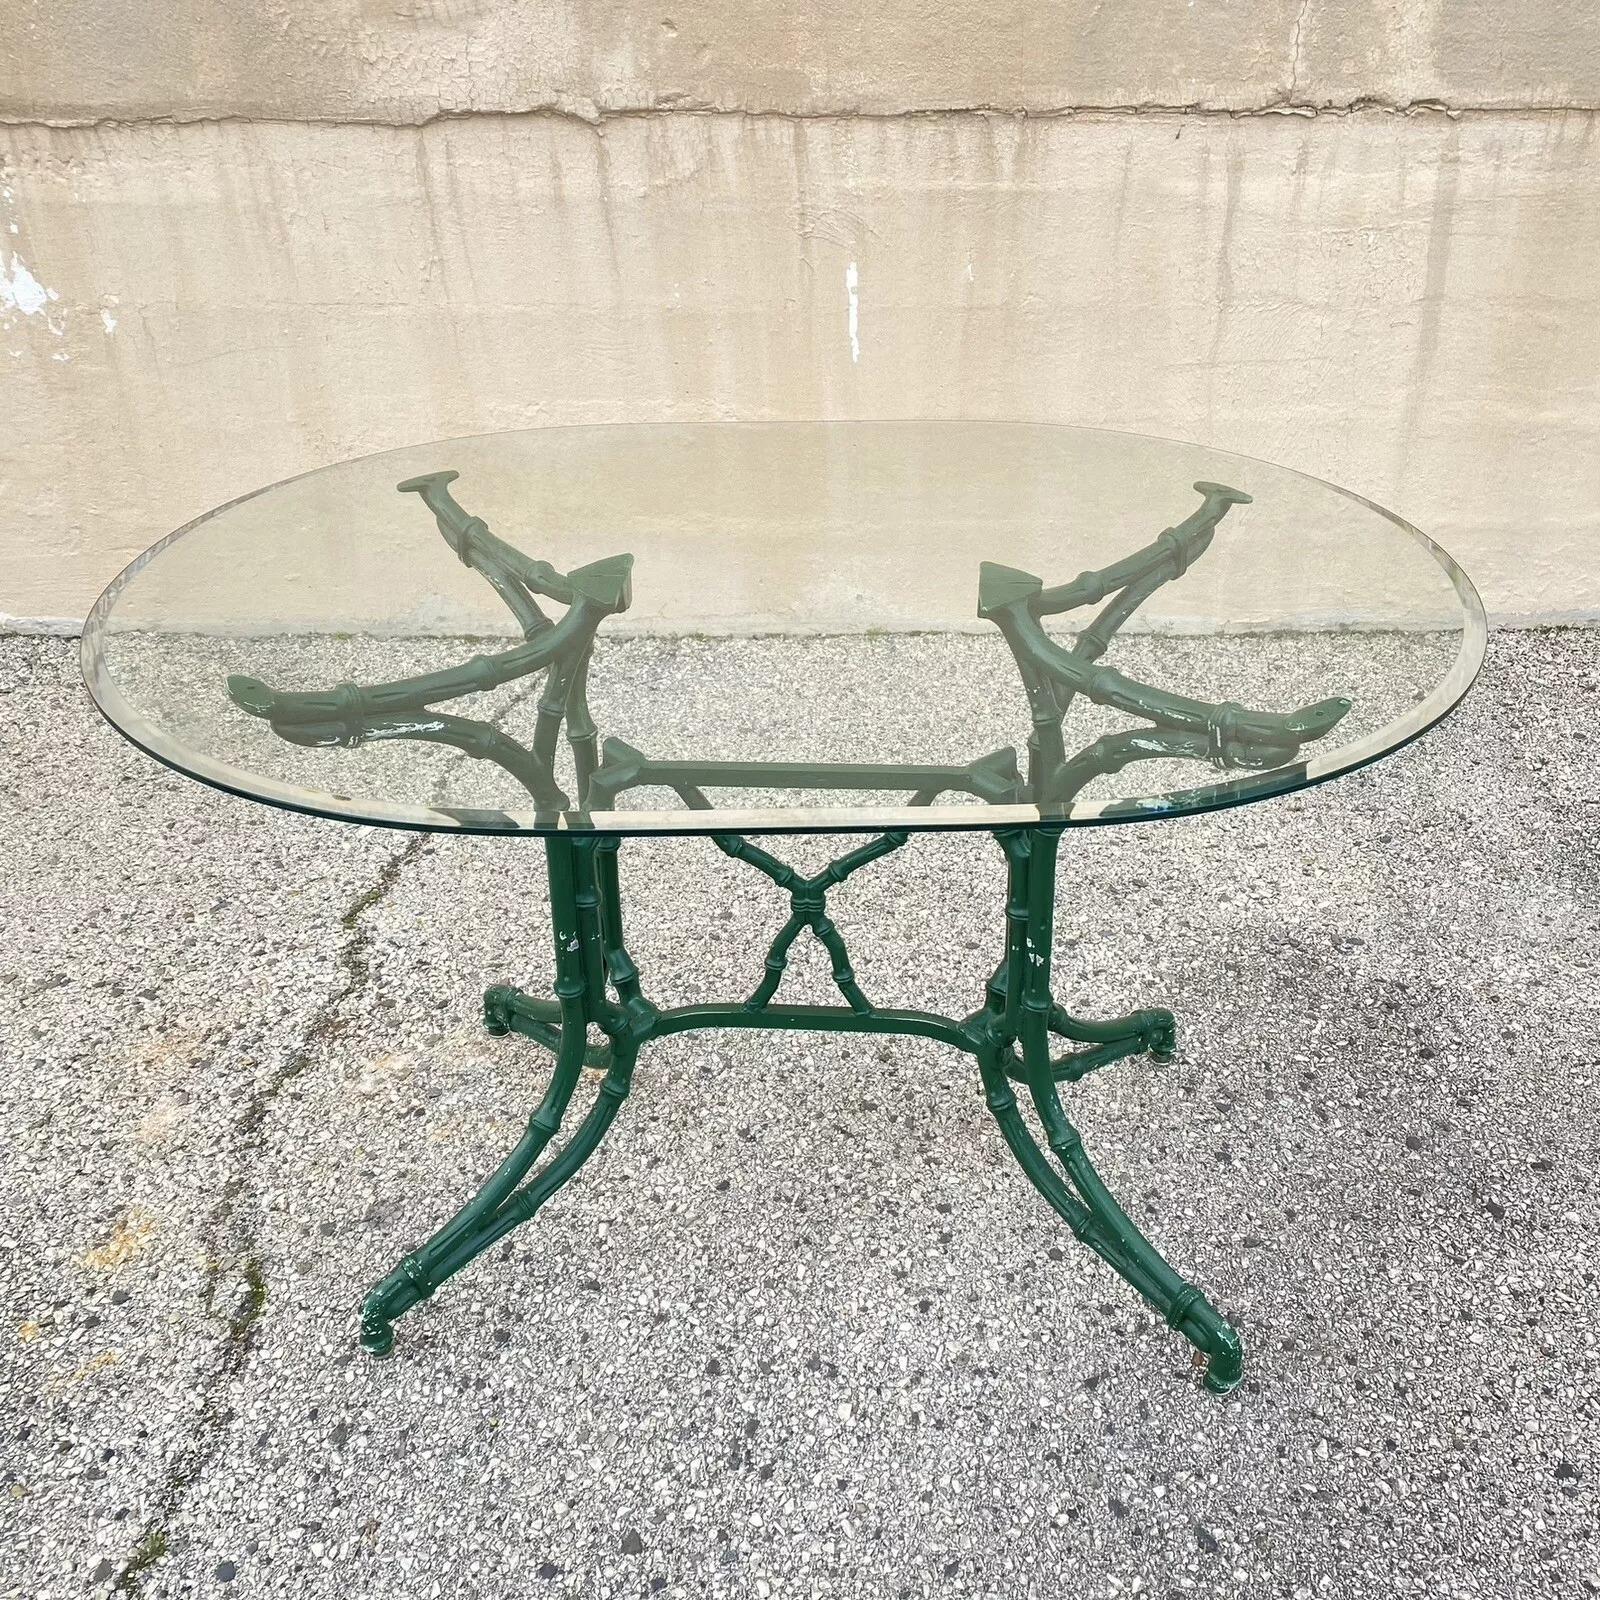 20th Century Vintage Hollywood Regency Faux Bamboo Lattice Metal Green Dining Set - 5 Pc Set For Sale